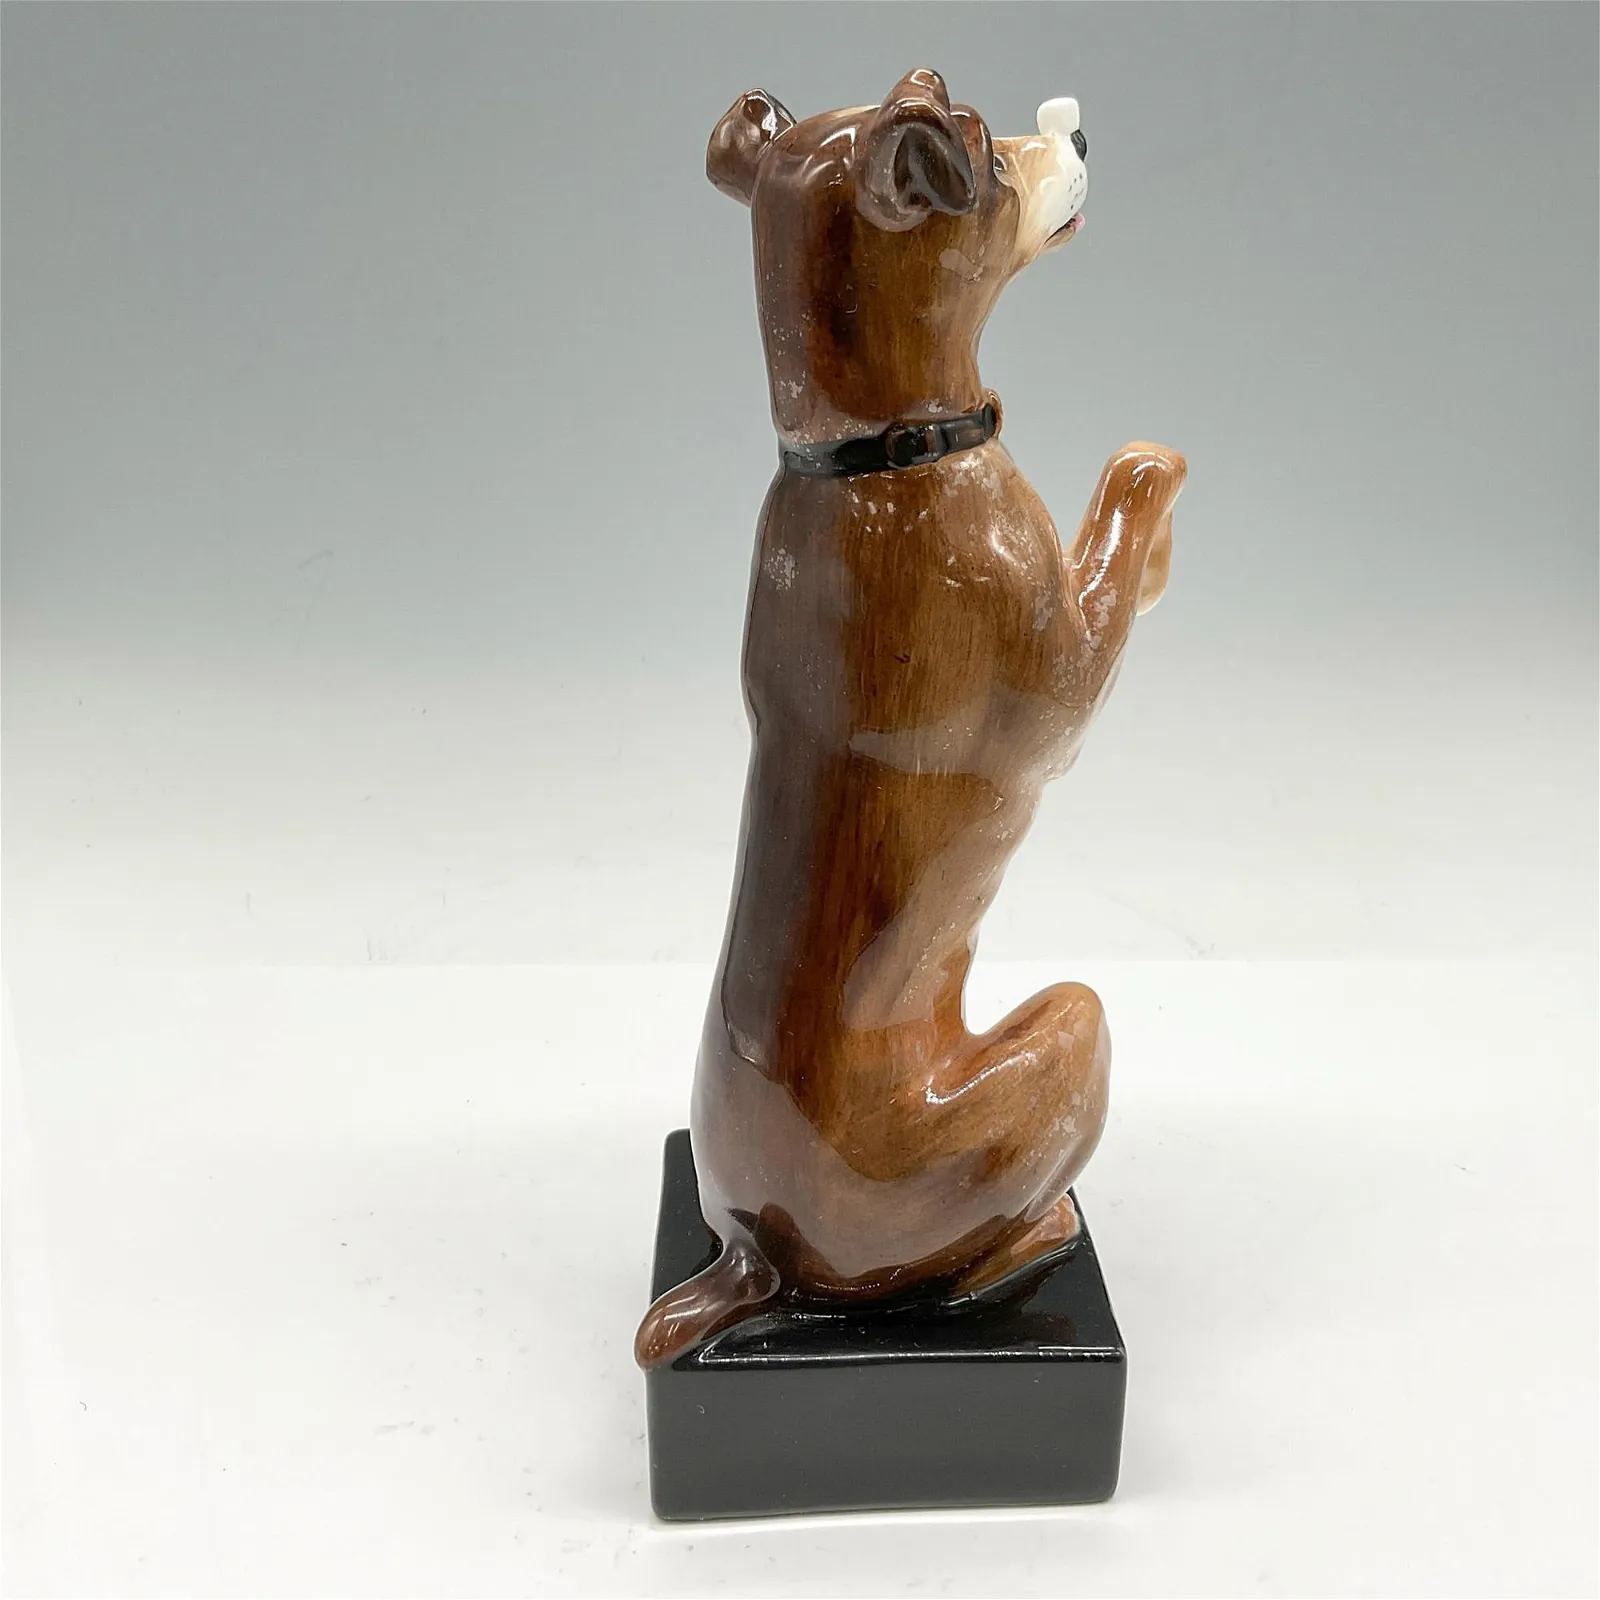 Dog with Cube on Nose - Royal Doulton Animal Figurine